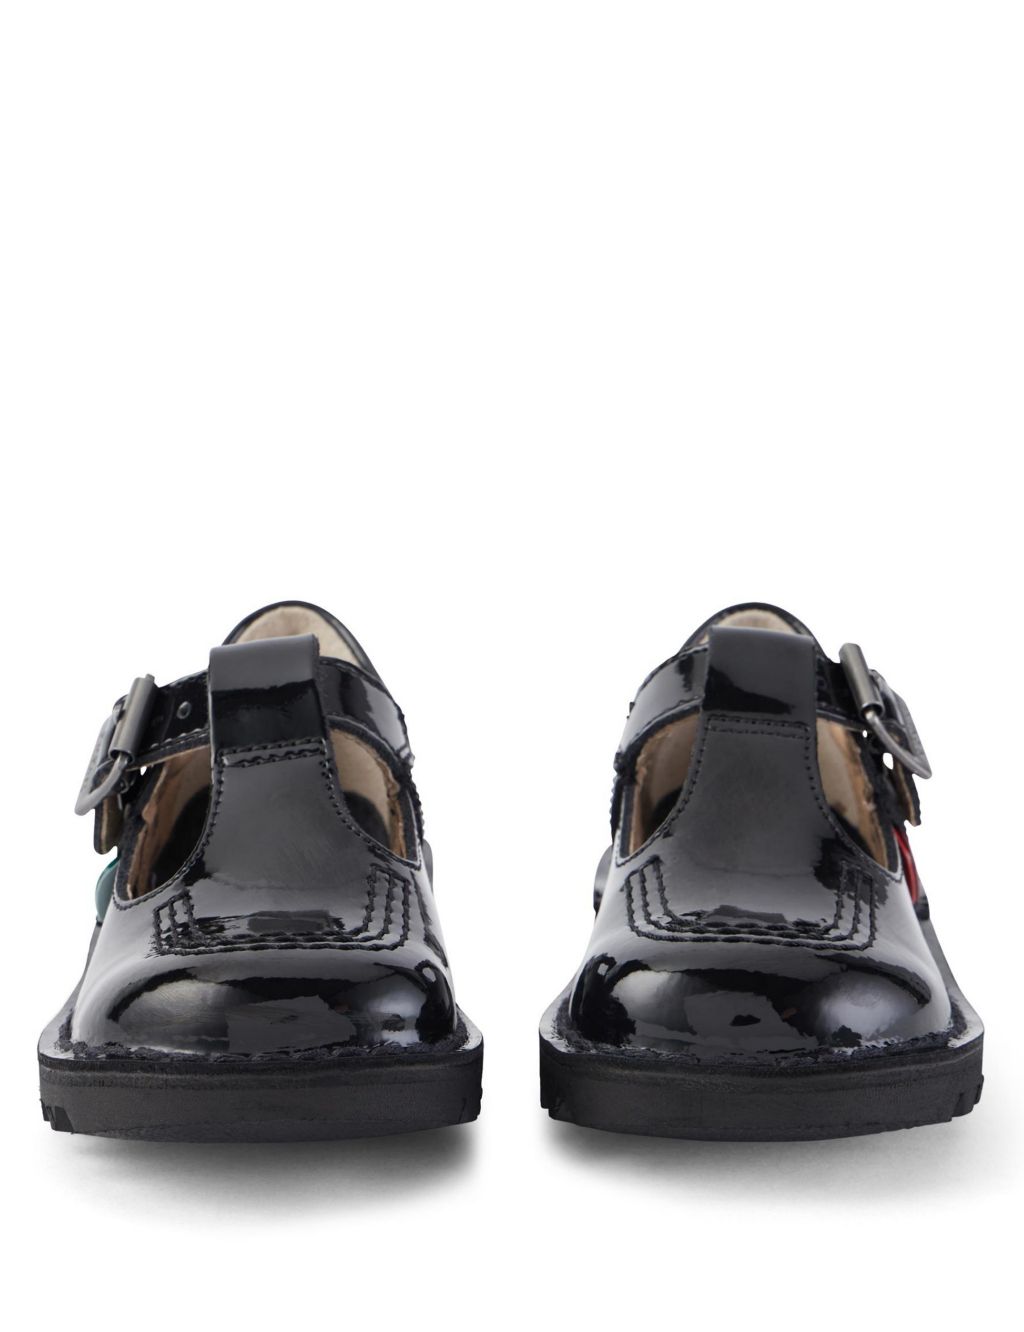 Kids' Patent Leather School Shoes image 4